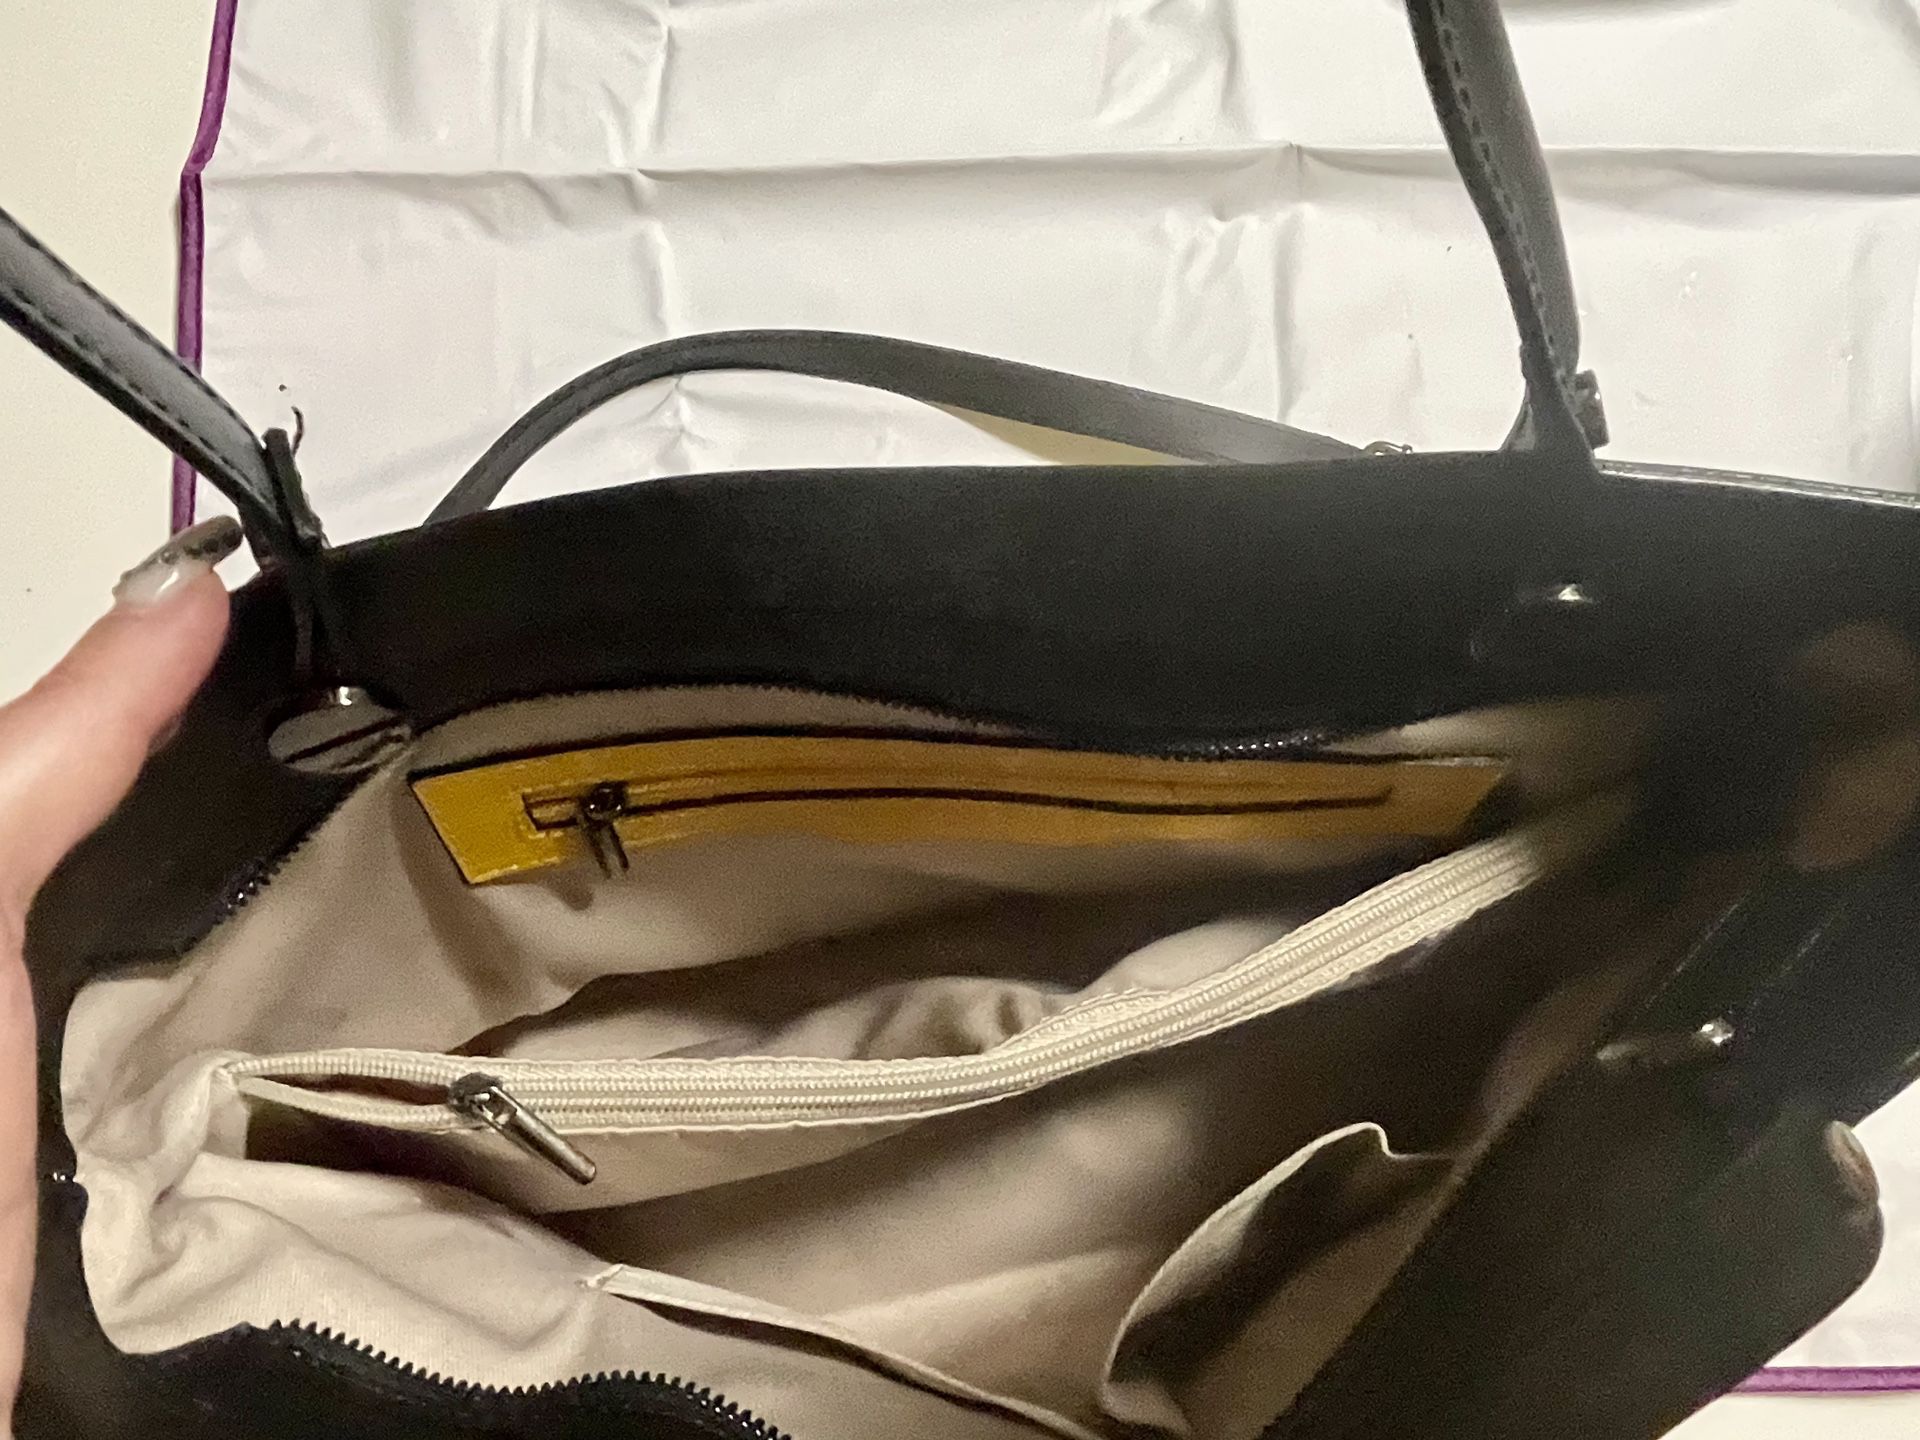 NWOT Genuine Vera Pelle Black Yellow Leather Bag Tote for Sale in